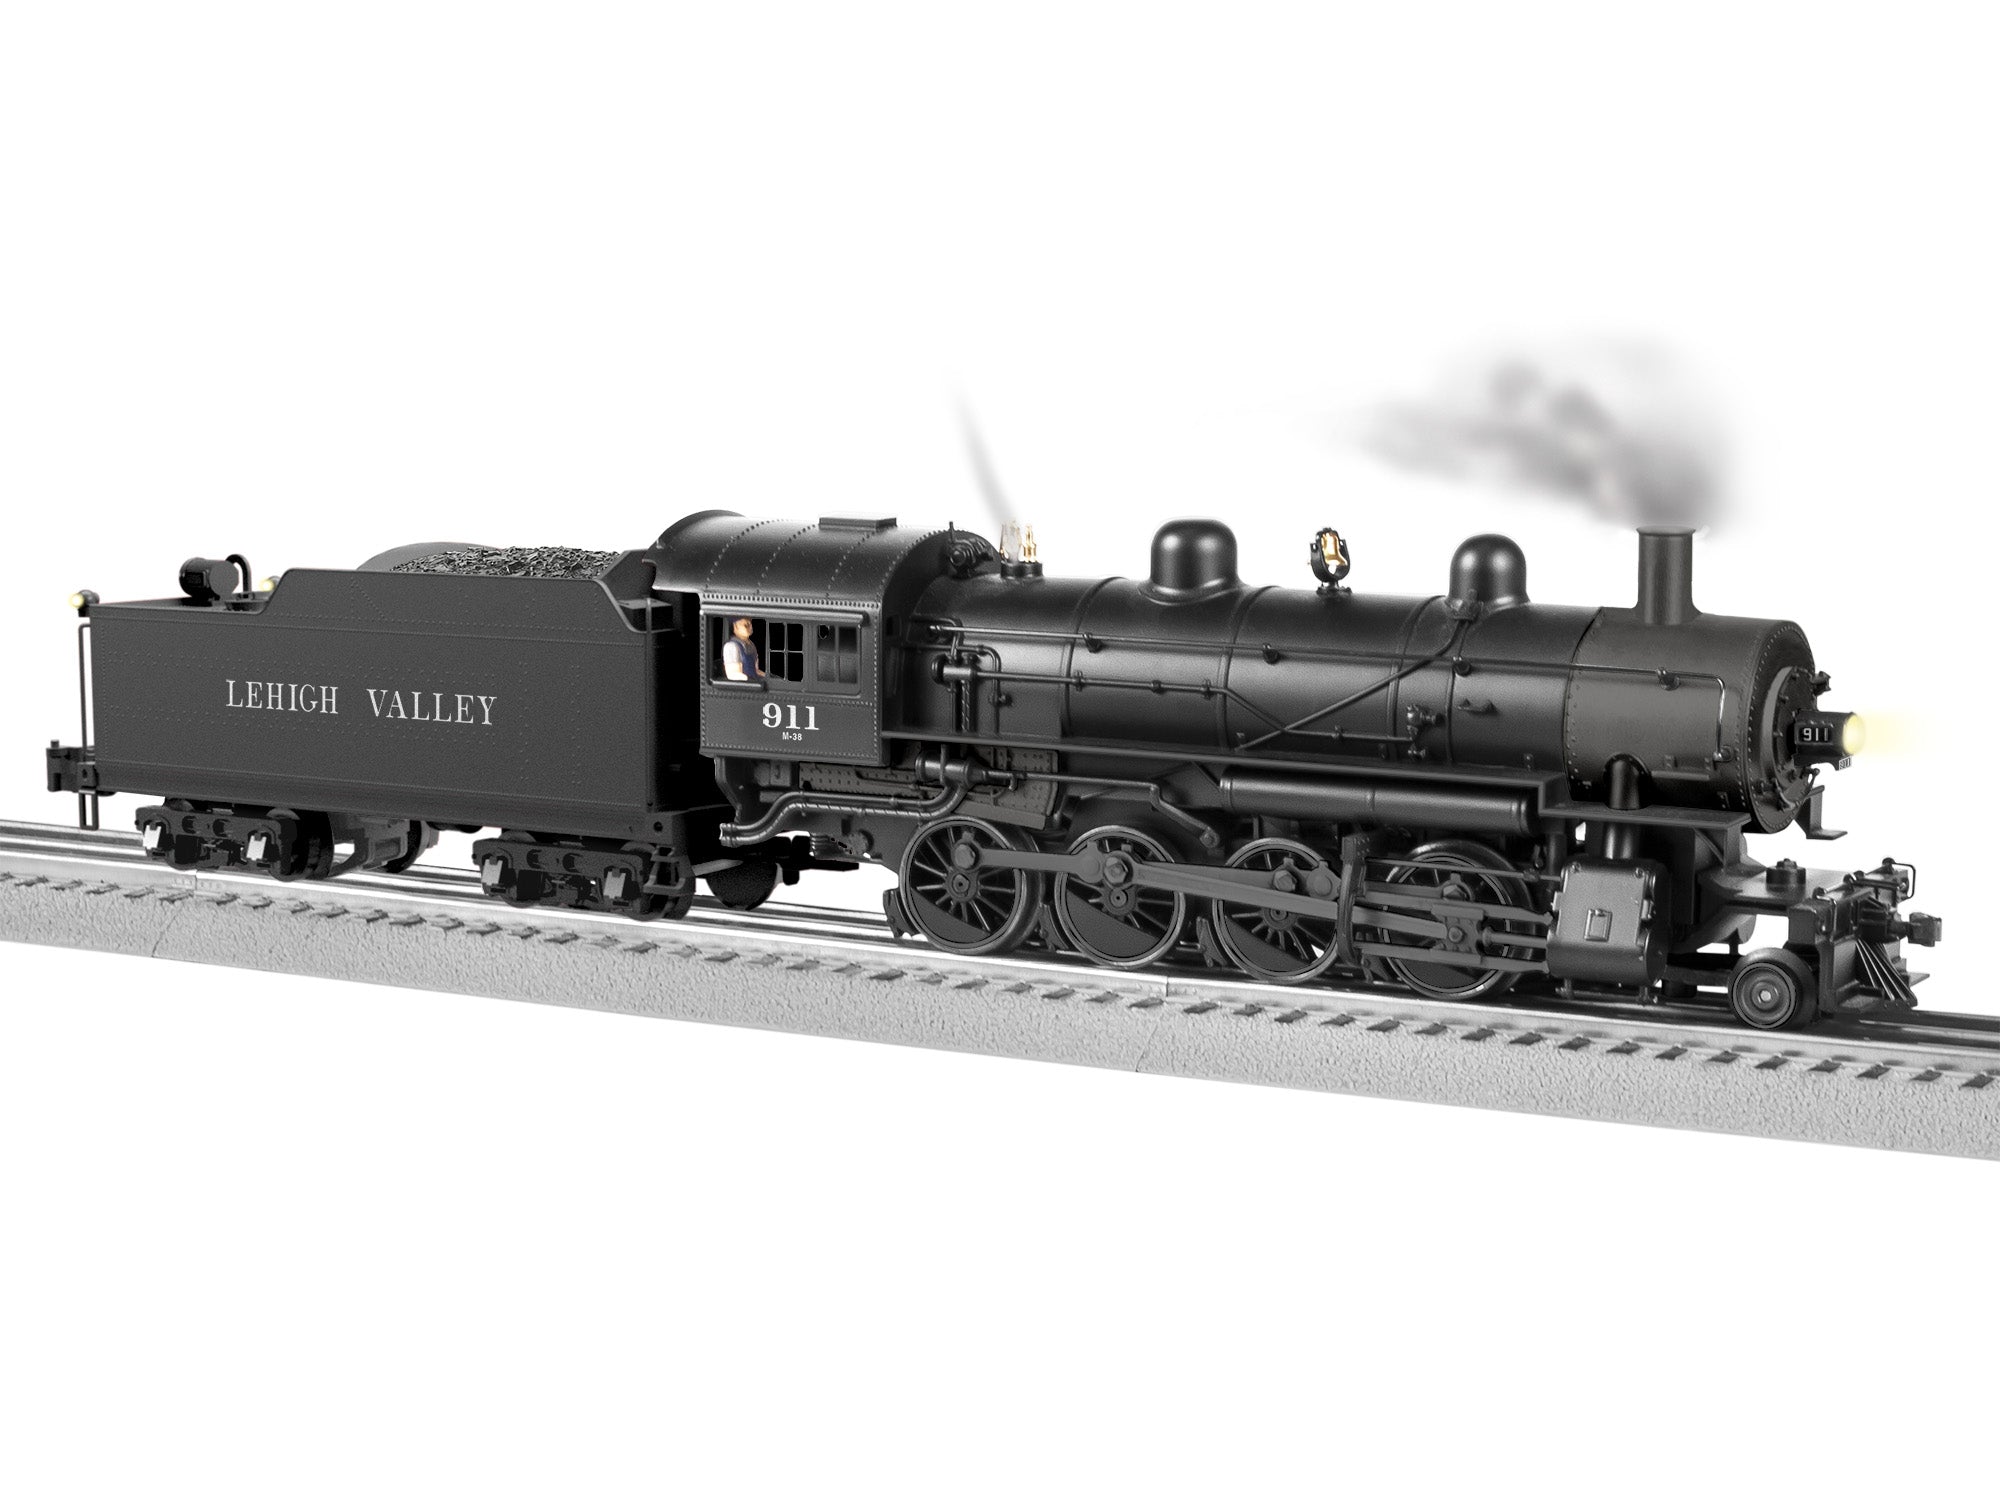 Lionel 2431380 - Legacy Consolidation Steam Engine "Lehigh Valley" #911